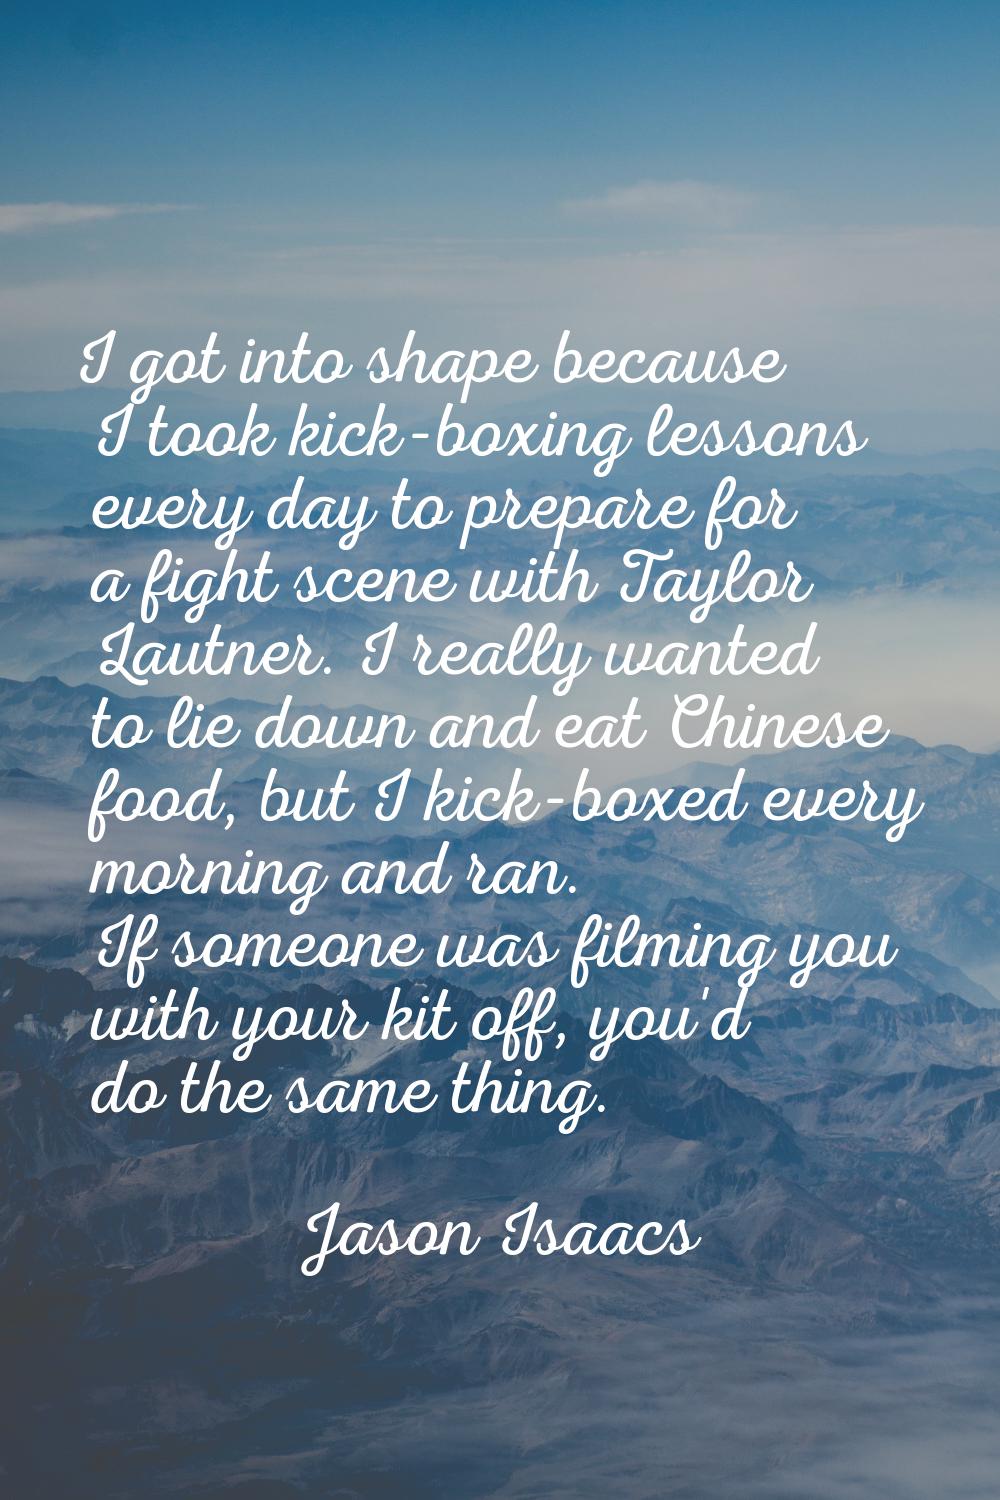 I got into shape because I took kick-boxing lessons every day to prepare for a fight scene with Tay